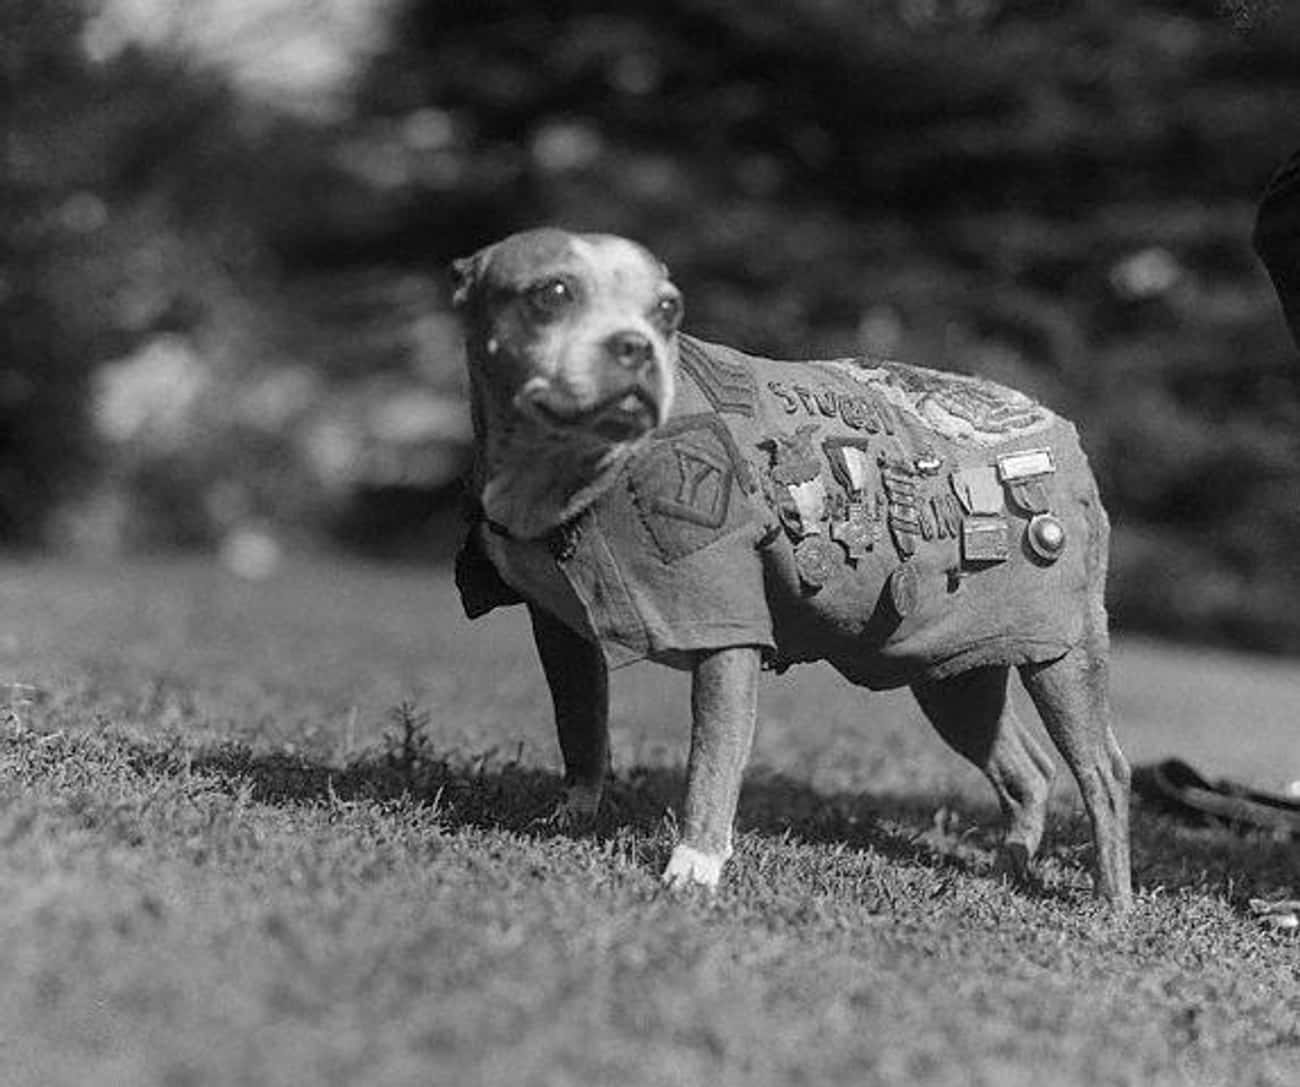 Sergeant Stubby Reports For Duty